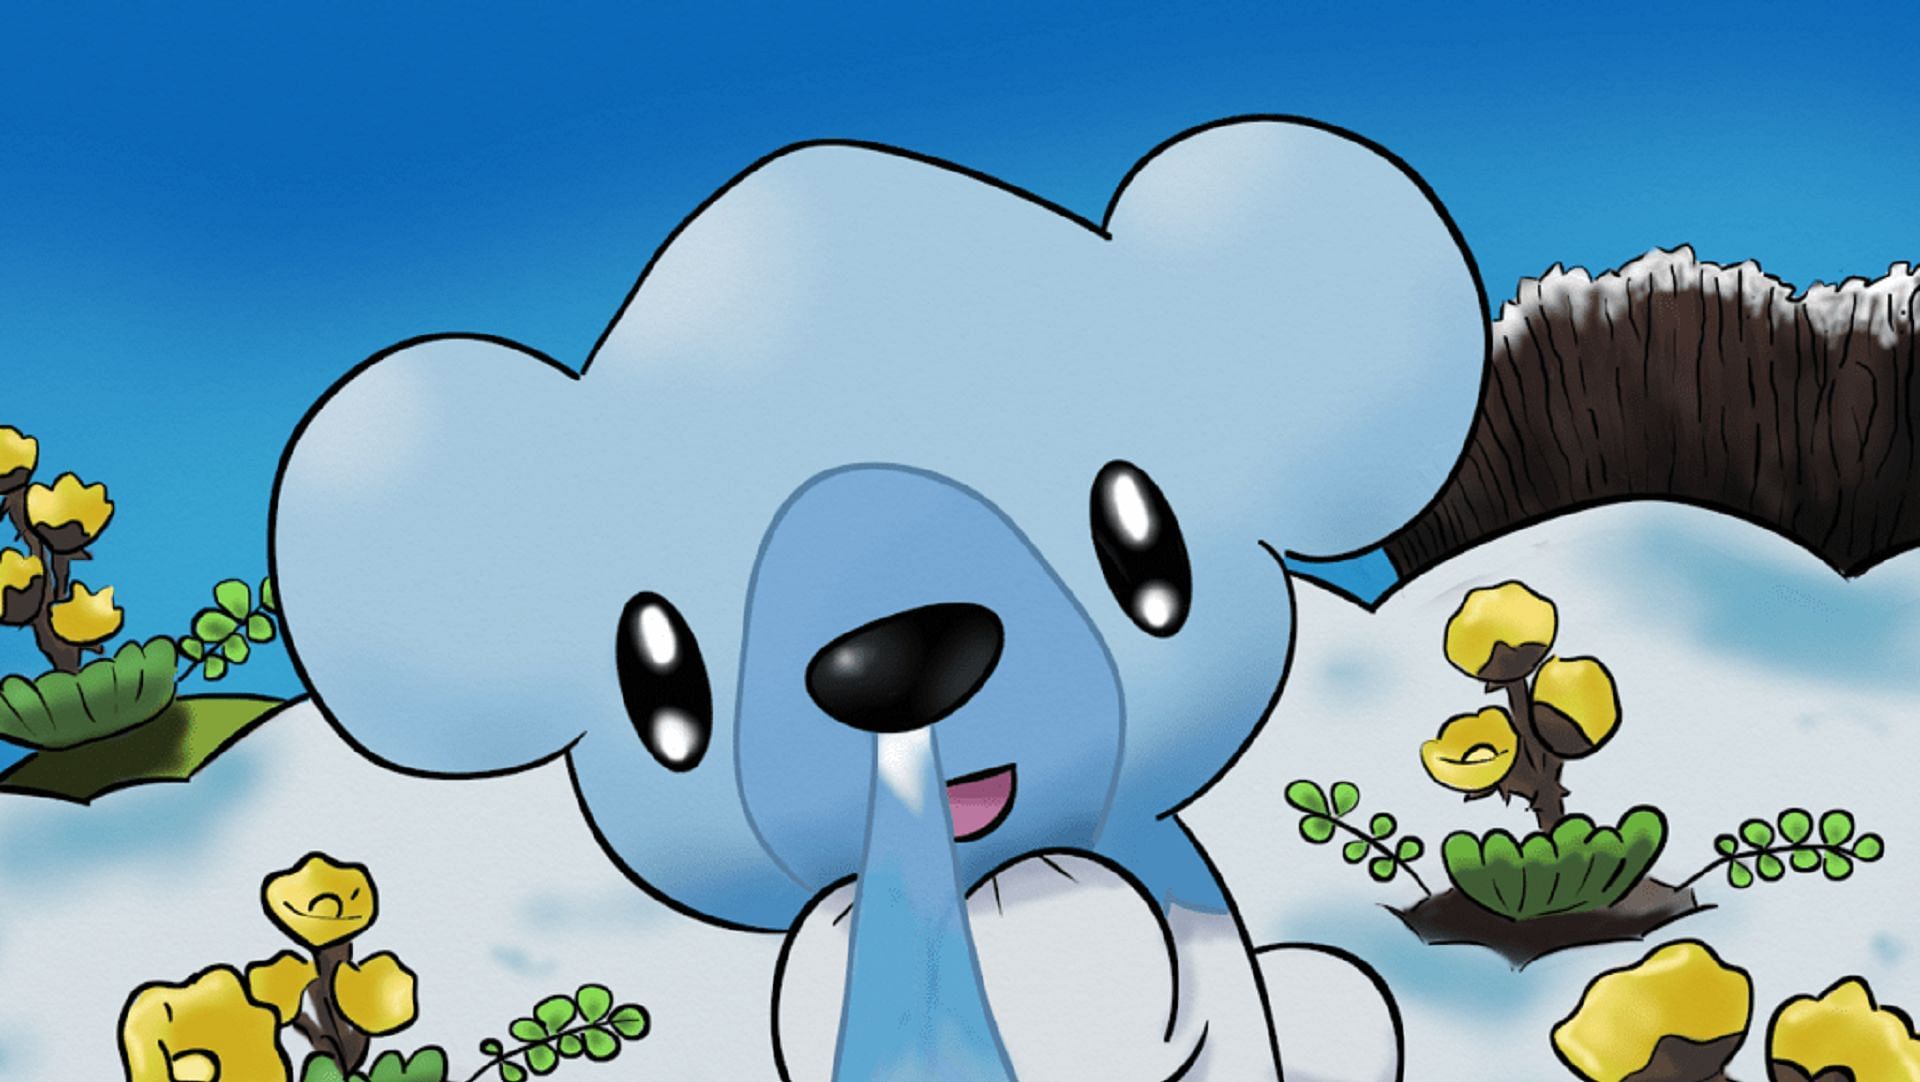 Cubchoo as it appears in the trading card game (Image via The Pokemon Company)